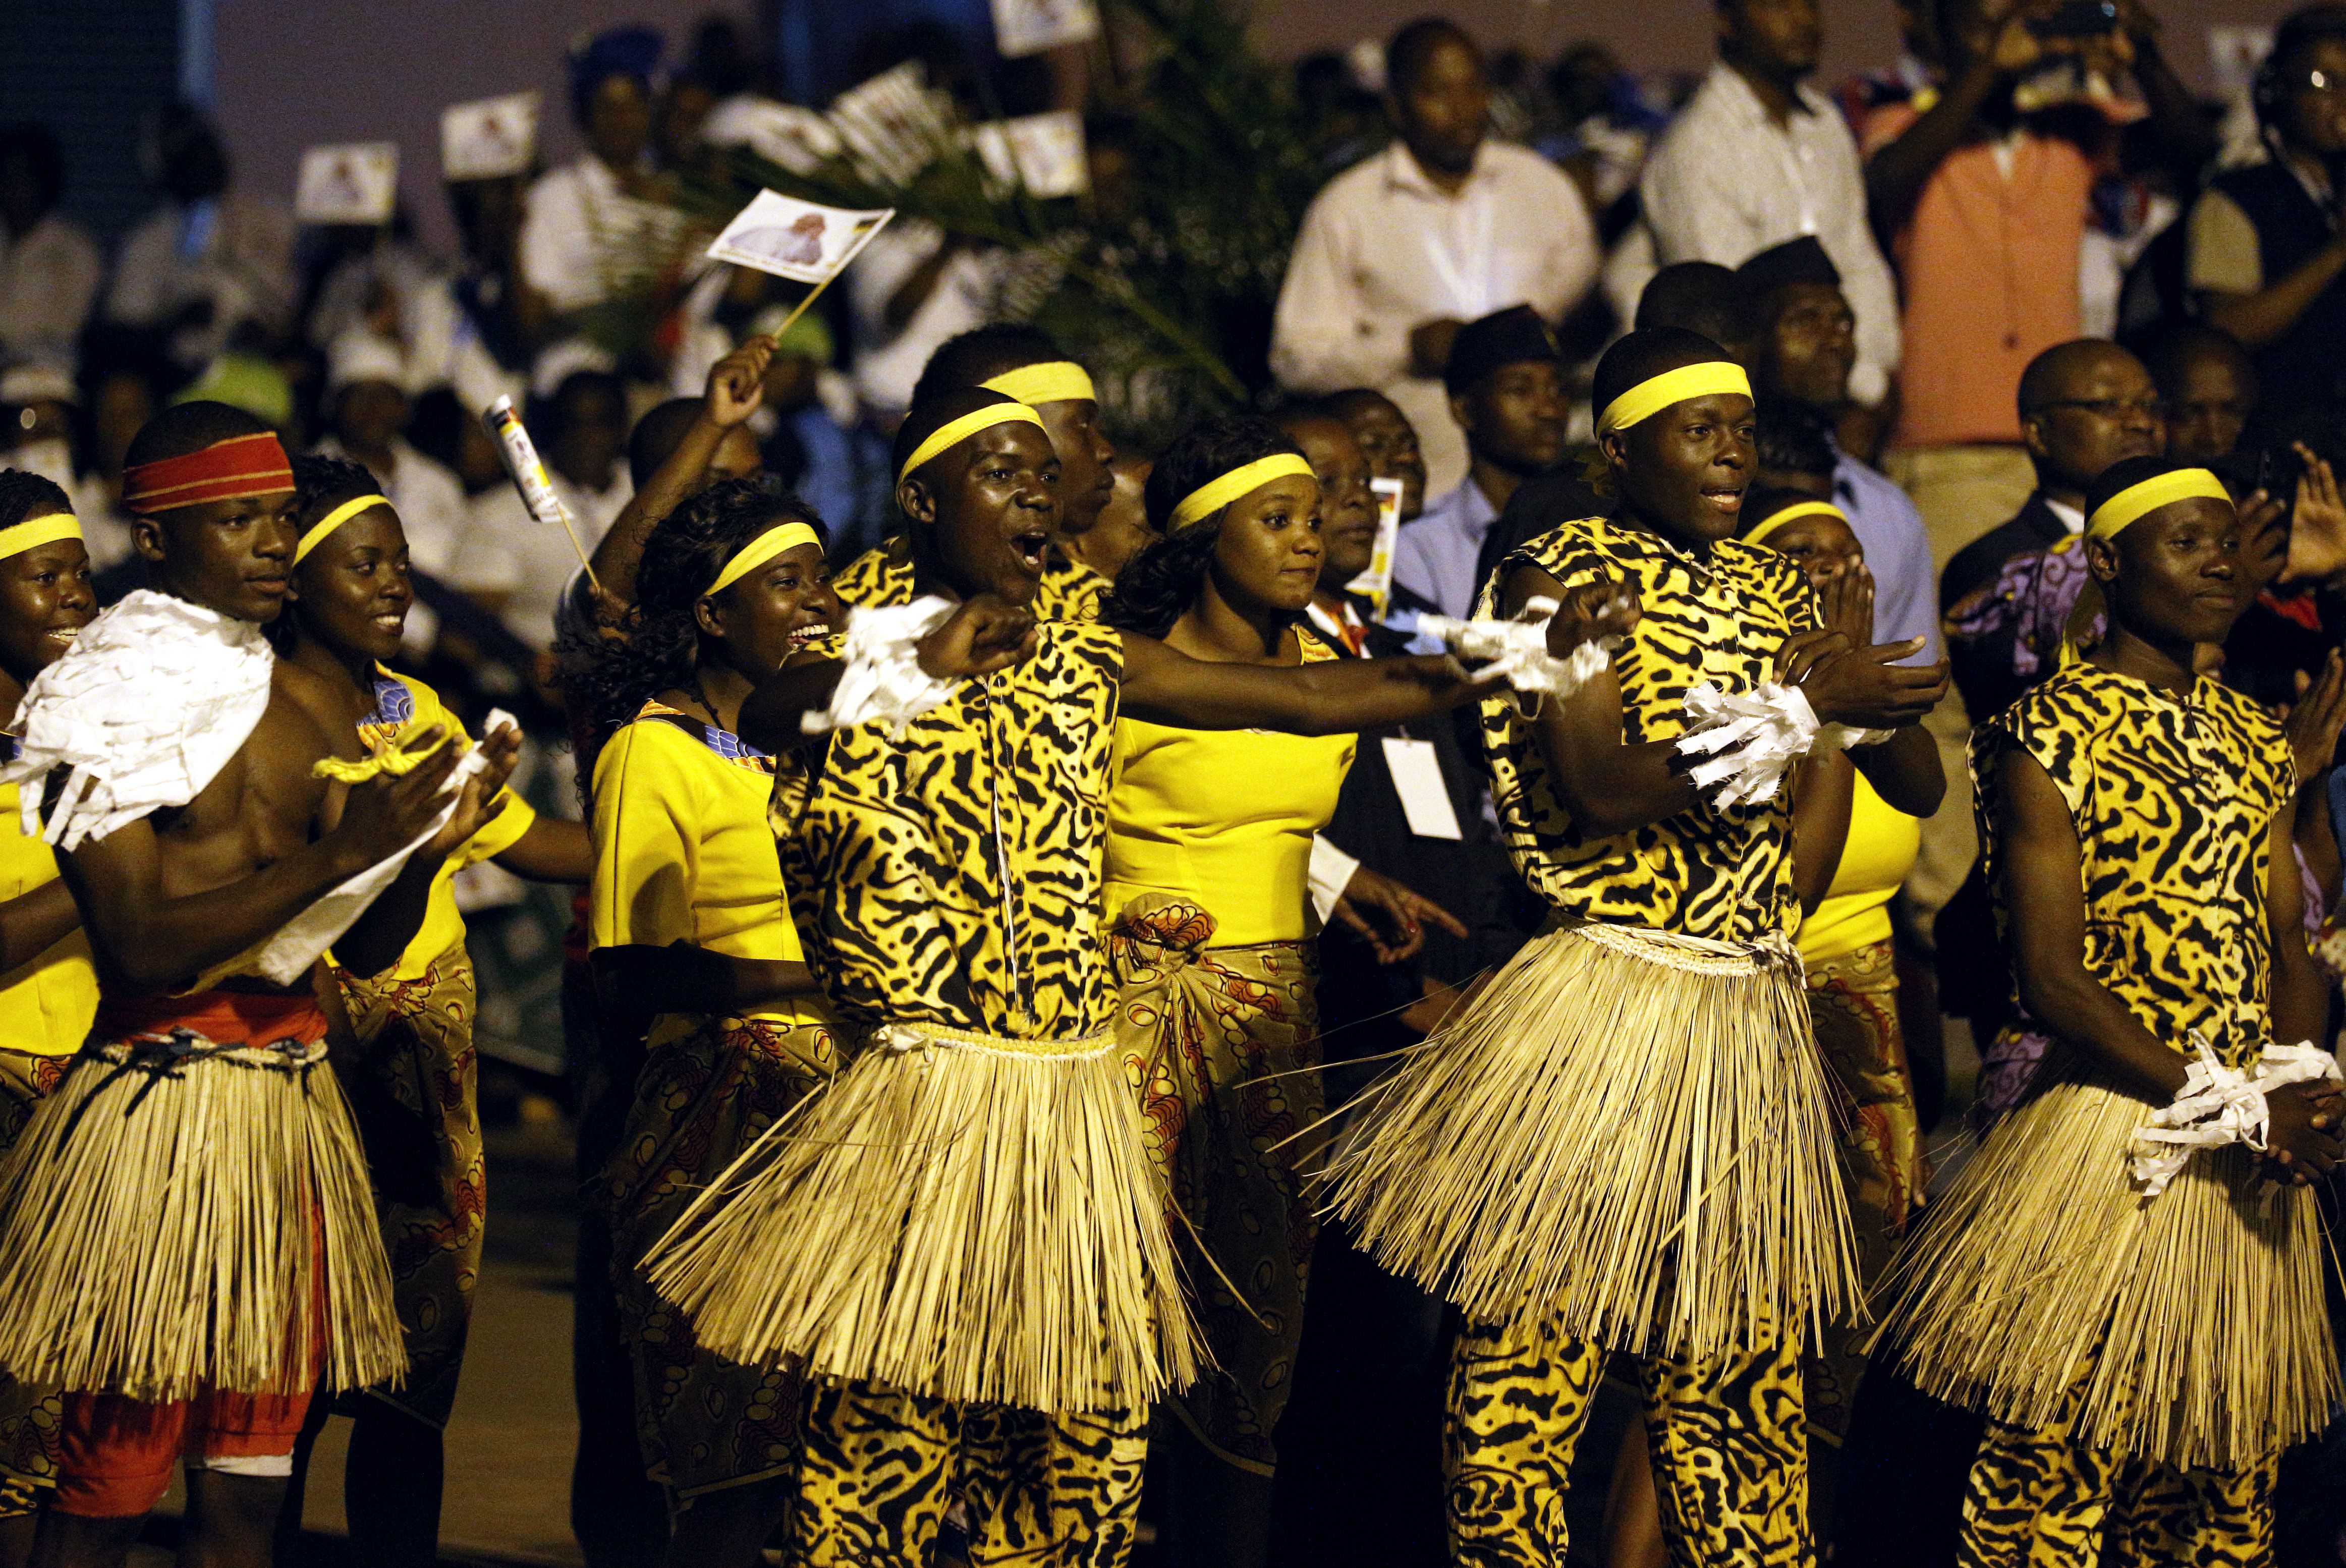 President, dancers and crowds welcome Pope Francis to Mozambique